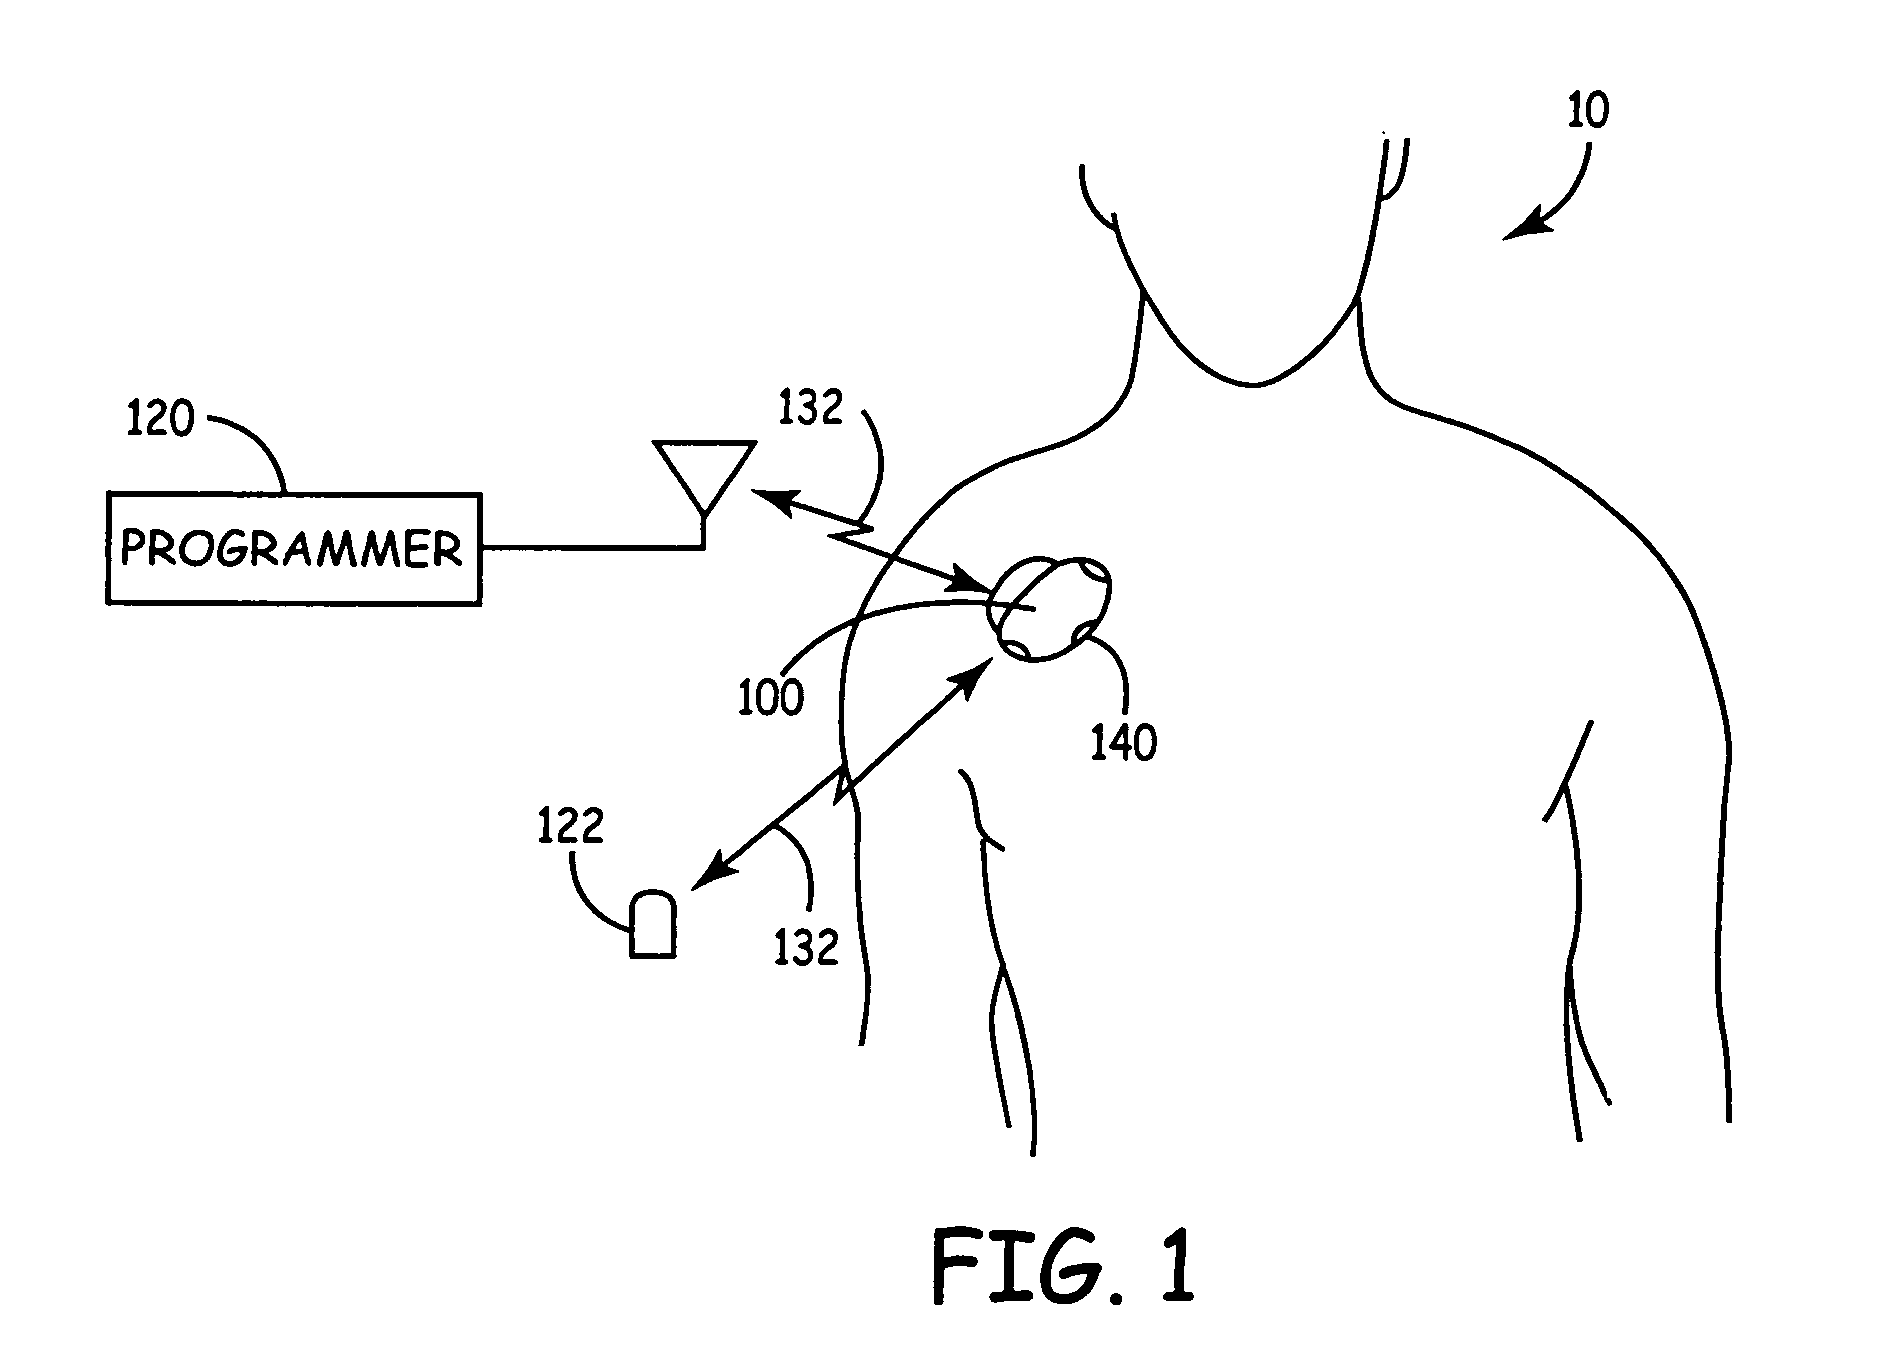 Techniques for user-activated data retention in an implantable medical device